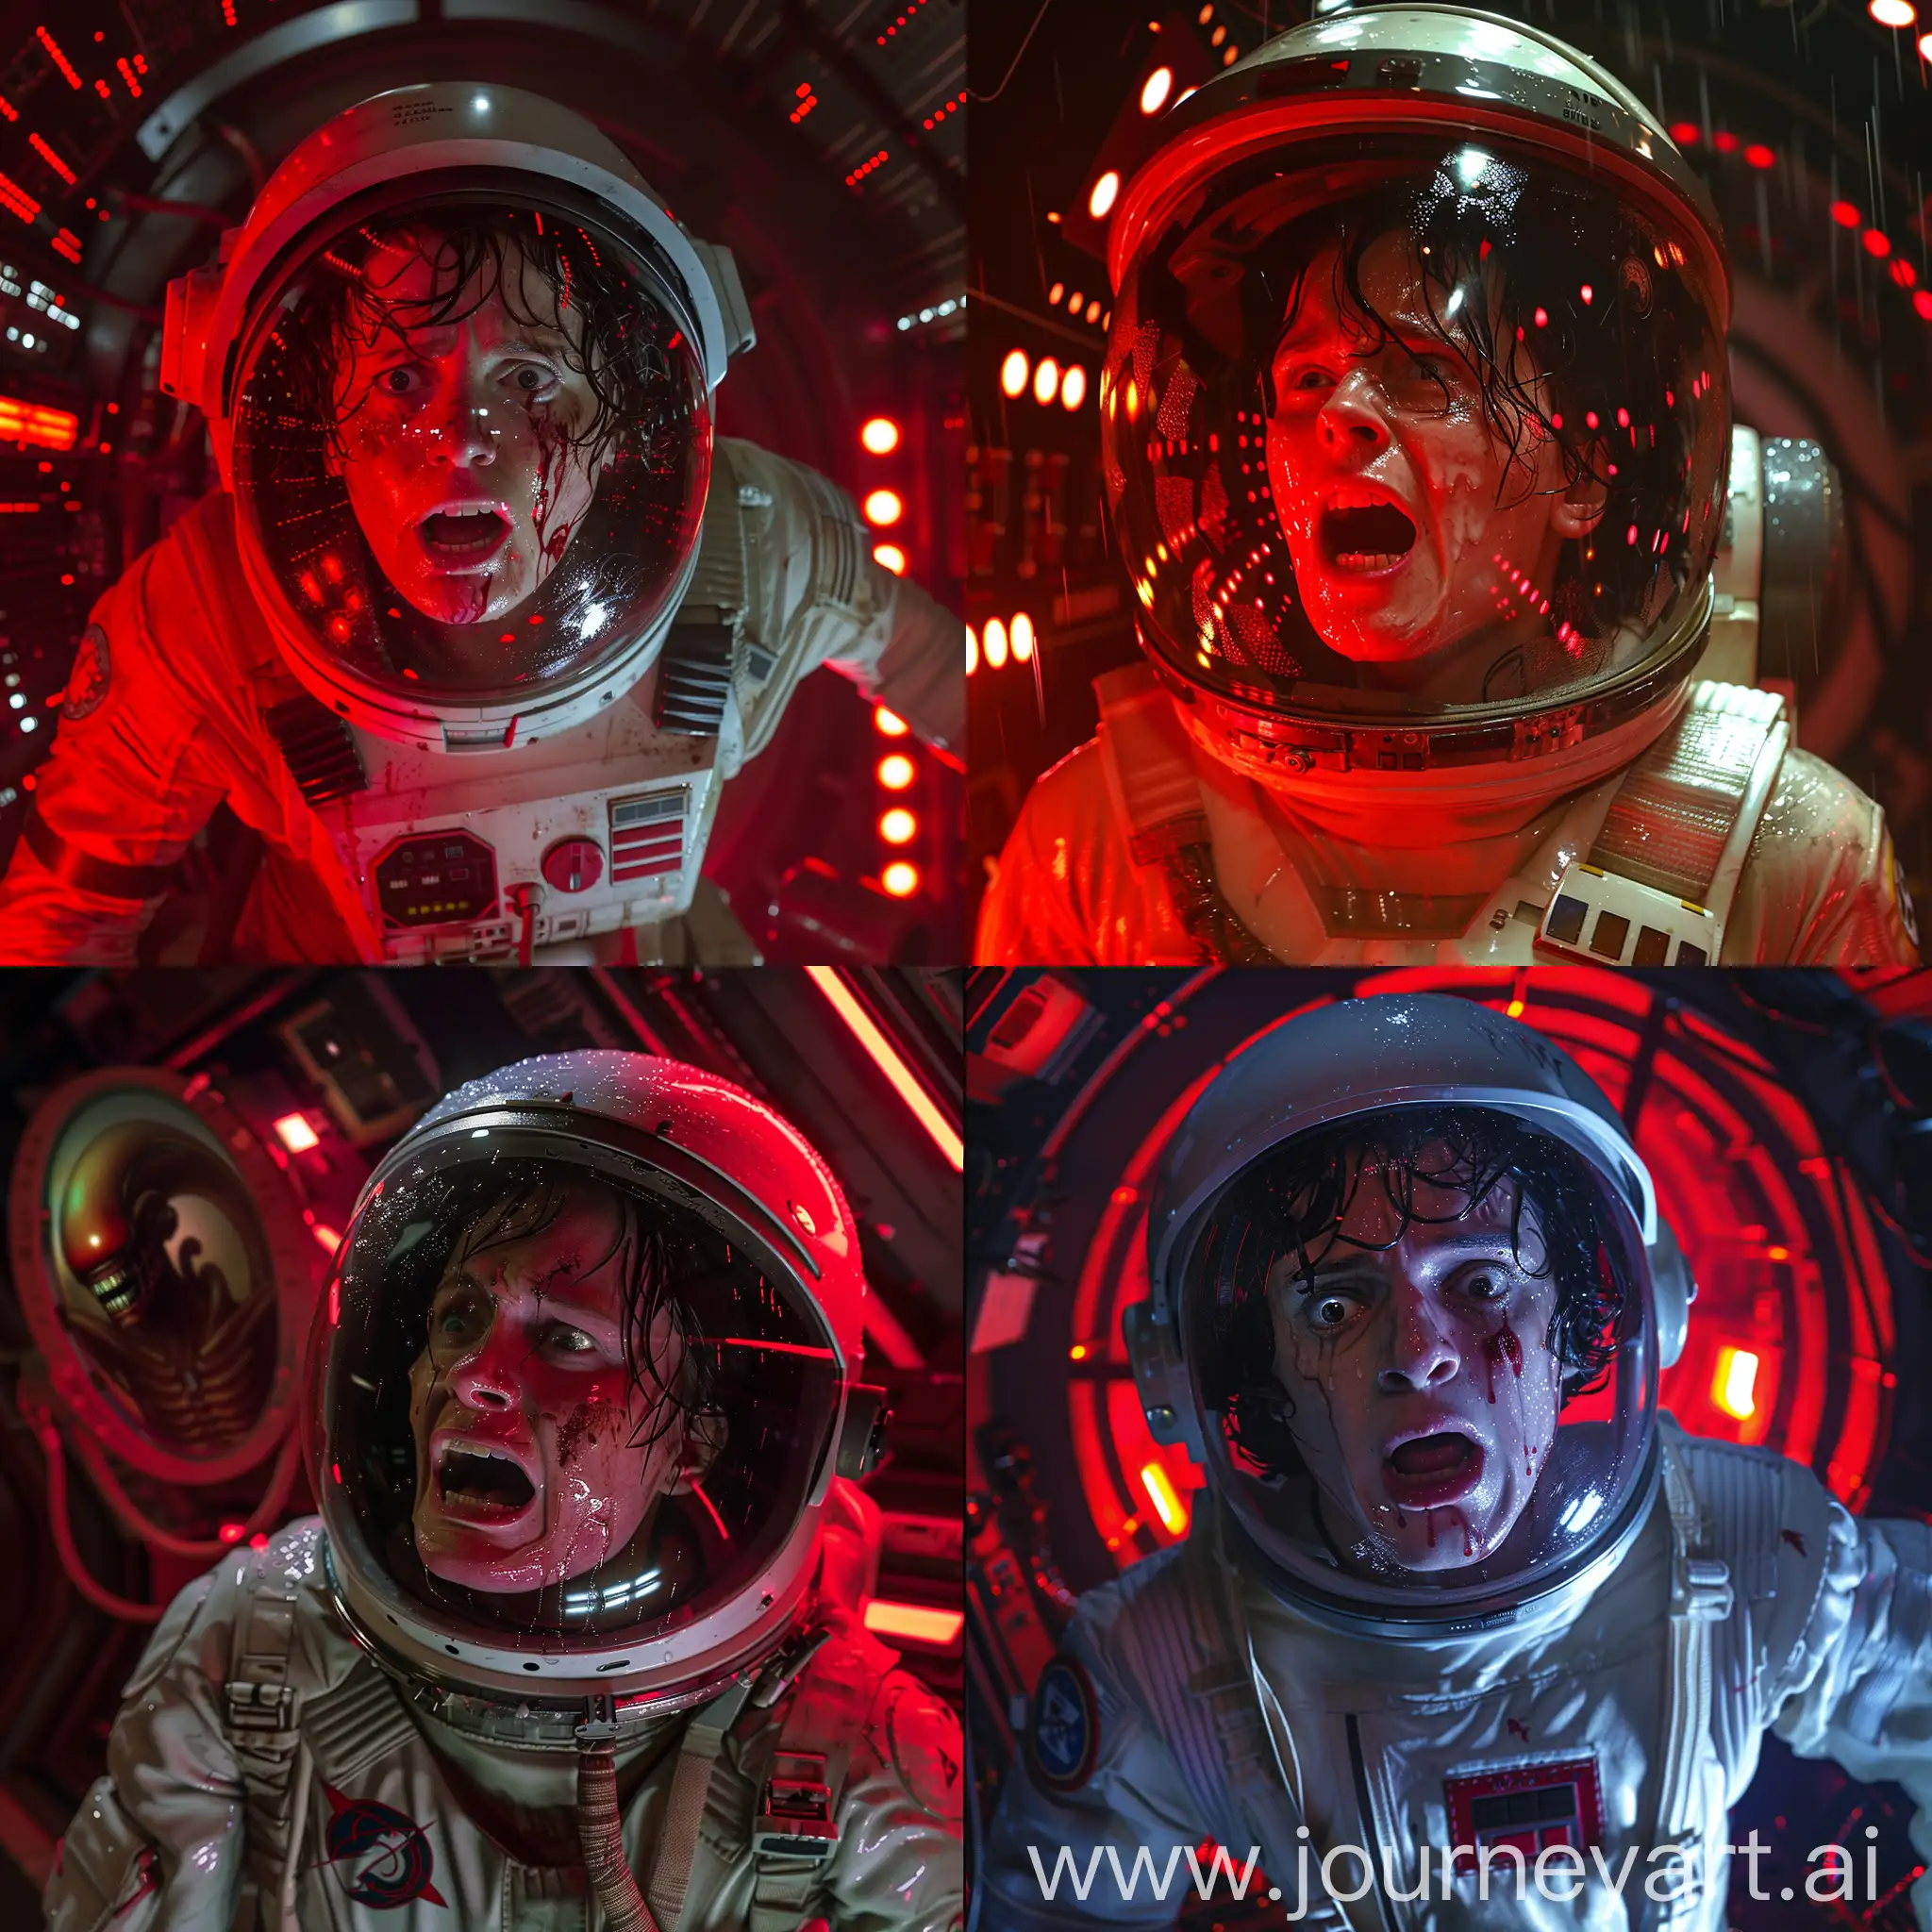 Daisy Ridley in Cinematic  scenes from New Movie of Alien of Ridley Scott, a character from the Alien films, wearing the astronaut uniform from the film Alien, in the claustrophobic, dense and dark interior of the Nostromo spaceship with red lights, with Daisy Ridley's face scared with wet hair and very sweaty, with the reflection of the Alien in front of him reflecting on the visor of his astronaut helmet, 8k resolution, cinematic image 